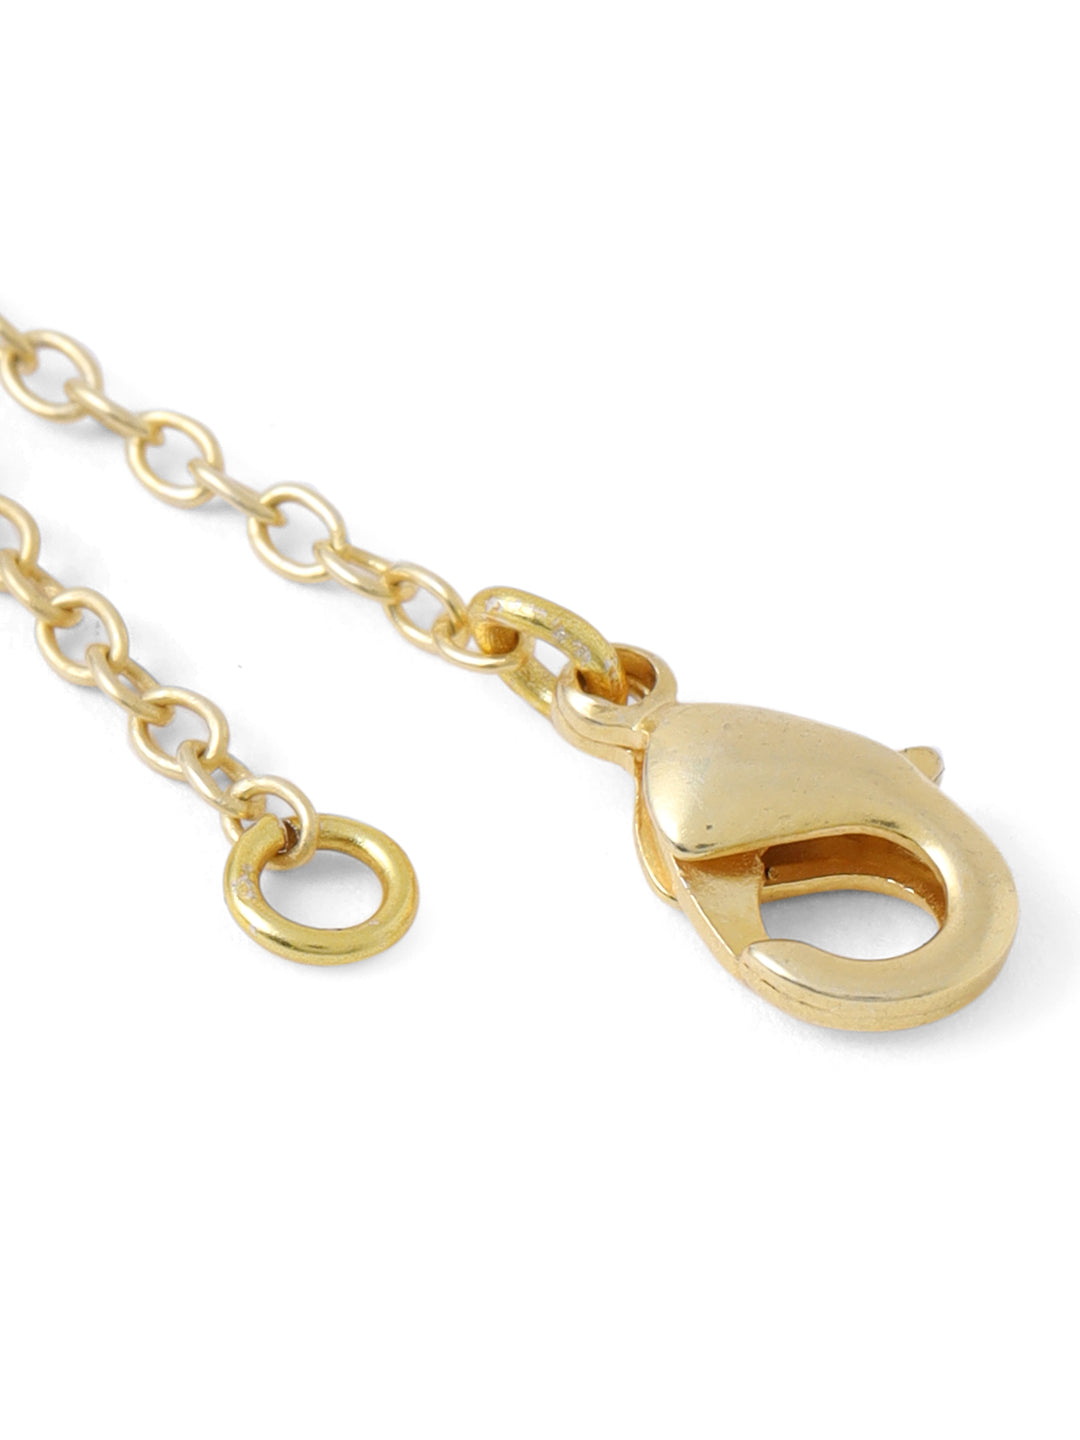 Antique Gold Albert Watch Chain with Fob & T-Bar | RH Jewellers